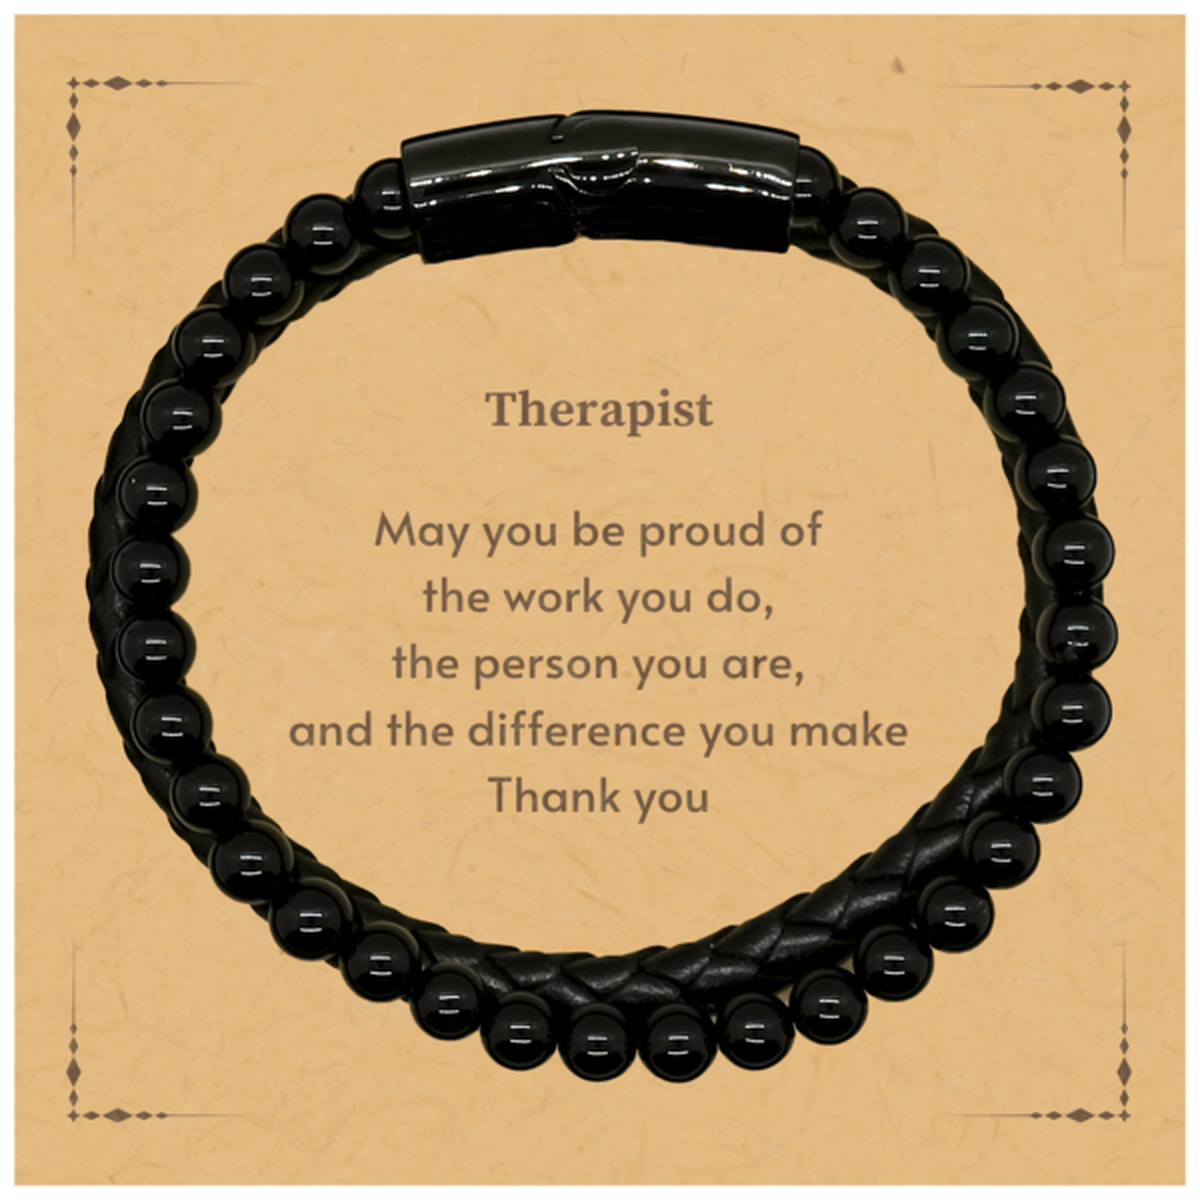 Heartwarming Stone Leather Bracelets Retirement Coworkers Gifts for Therapist, Therapist May You be proud of the work you do, the person you are Gifts for Boss Men Women Friends